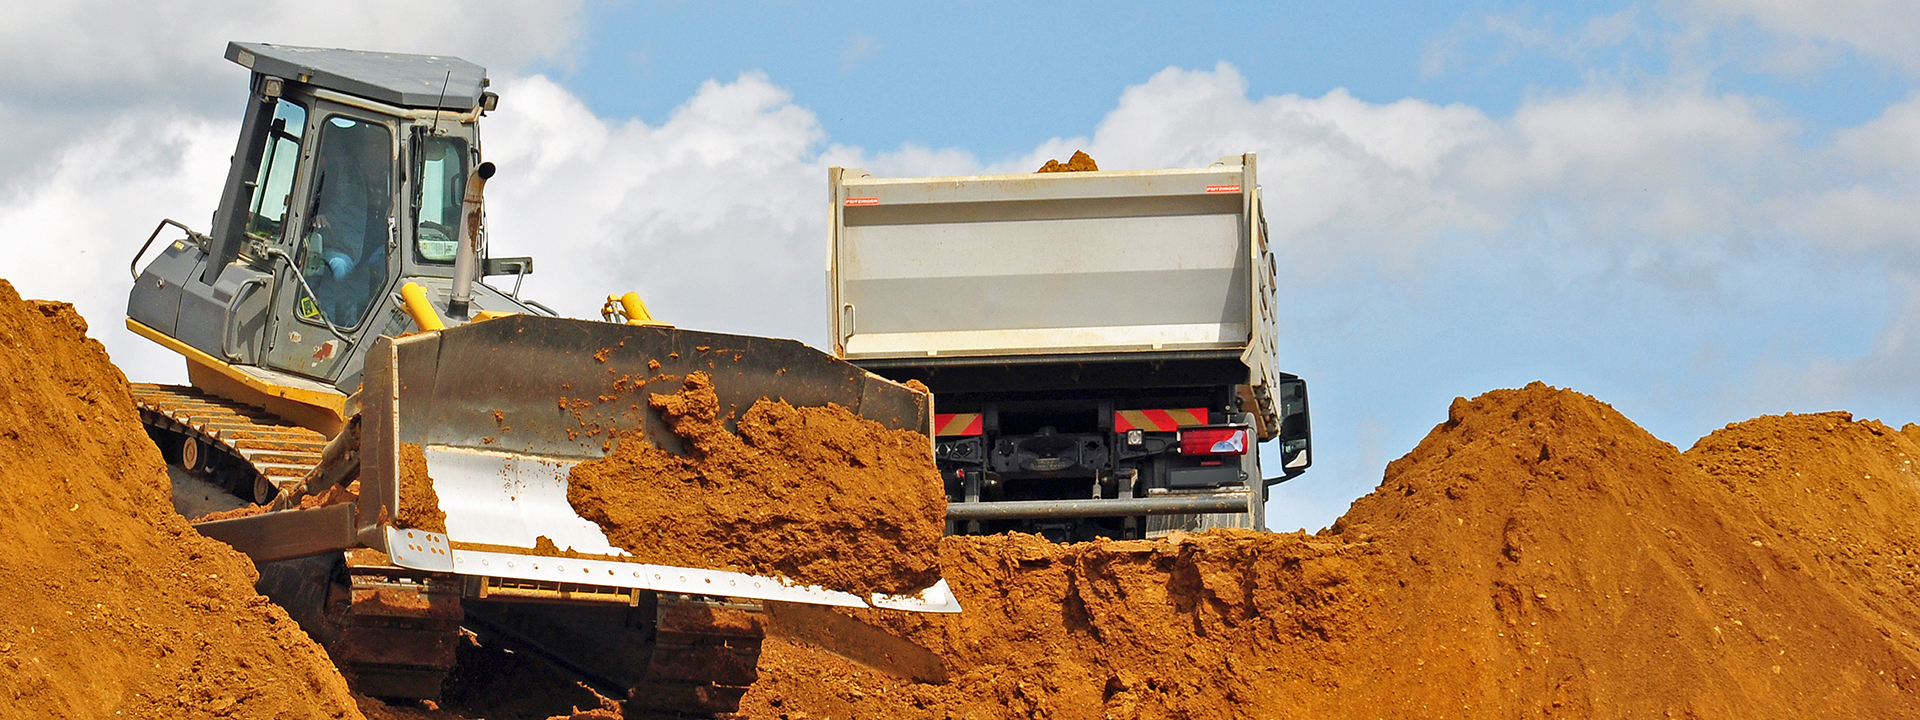 excavator tipper in use